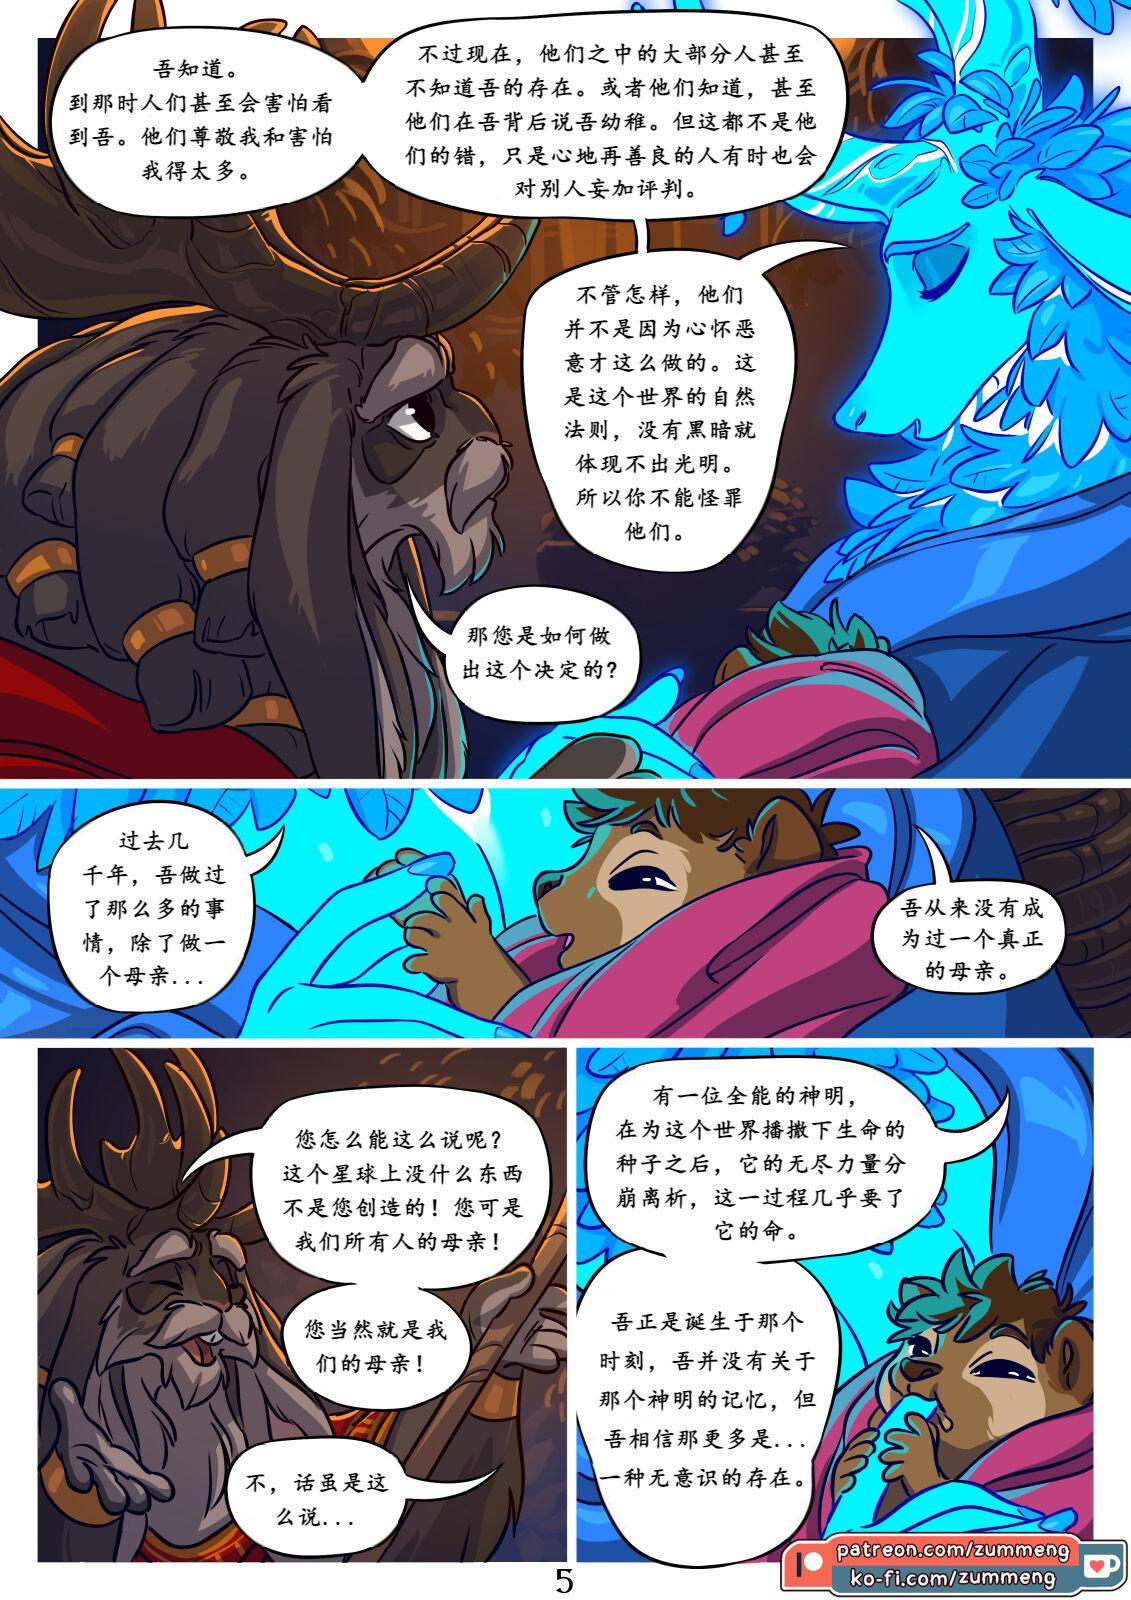 Neighbor Tree of Life-by Zummeng Eurobabe - Page 6